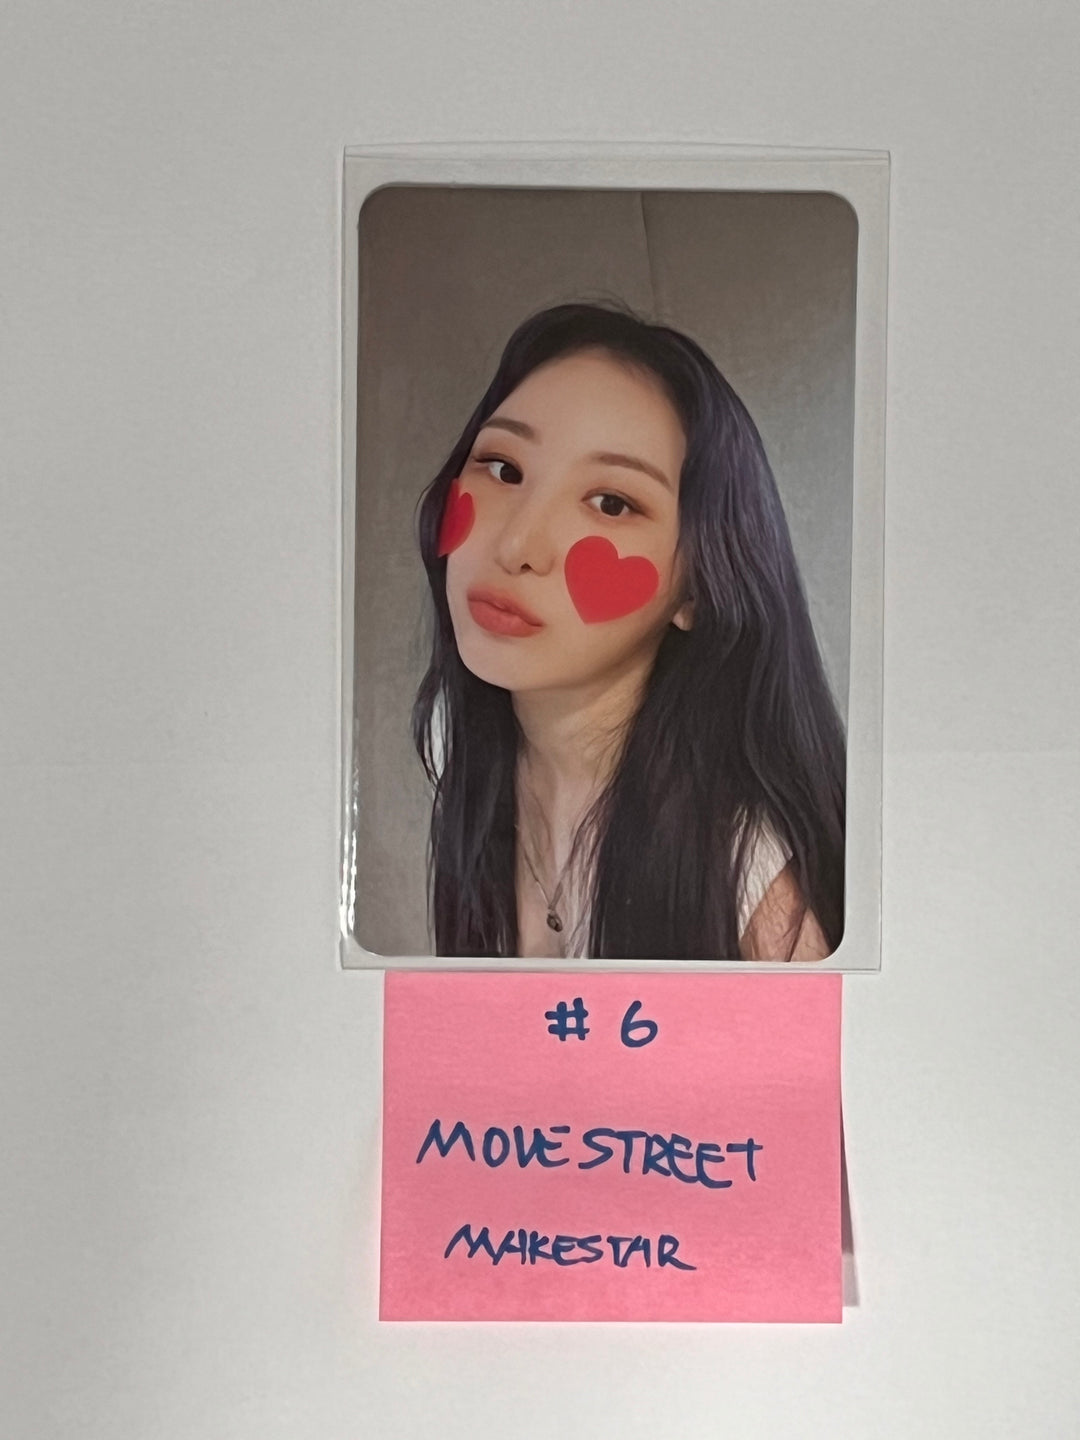 Lee Chae Yeon "The Move Street" - Makestar Fansign Event Photocard Round 2 [Poca Ver] [23.09.25]